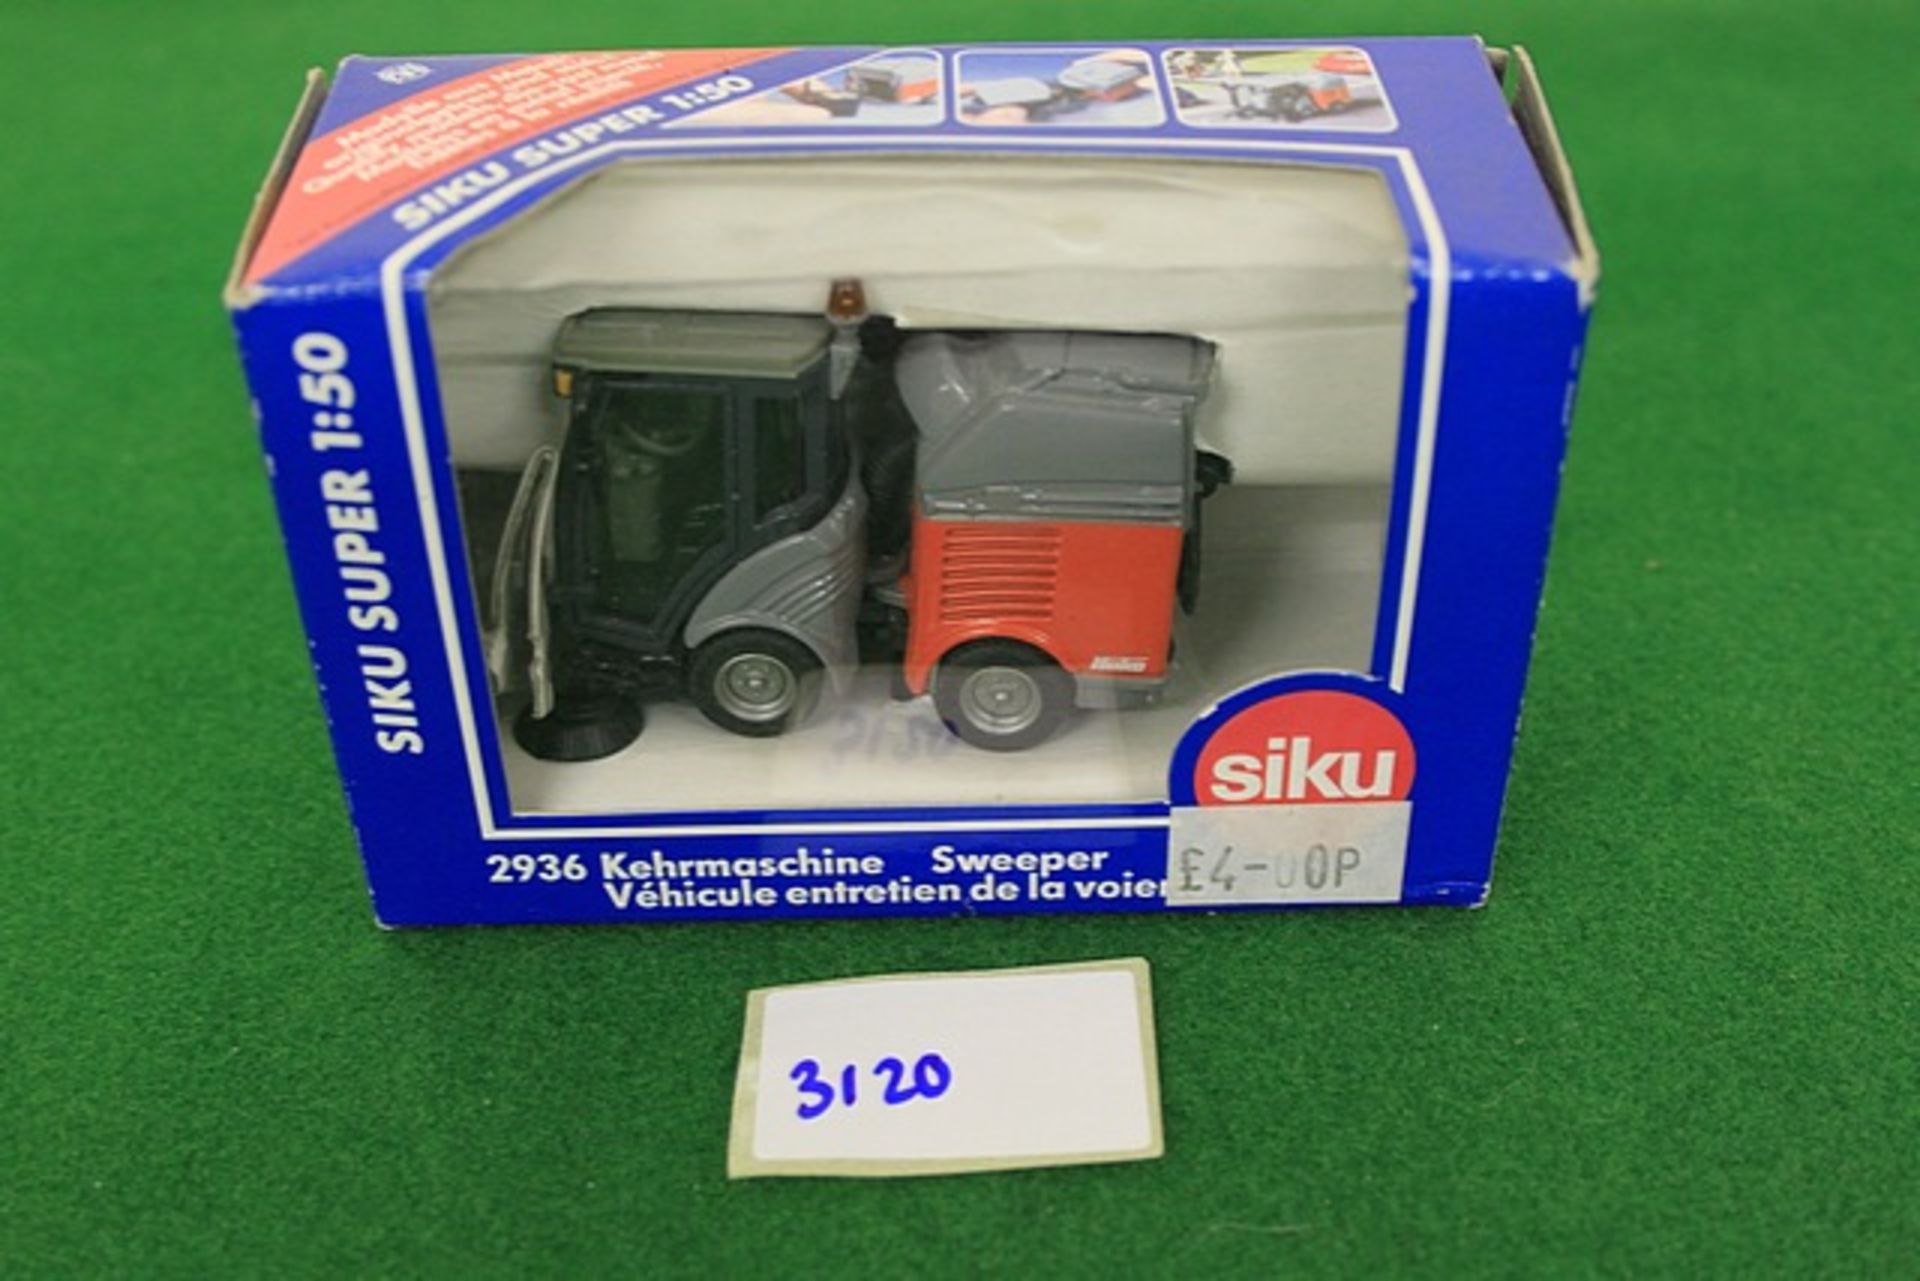 Siku 2936 Diecast Street Sweeper Scale 1/50 Complete With Box.